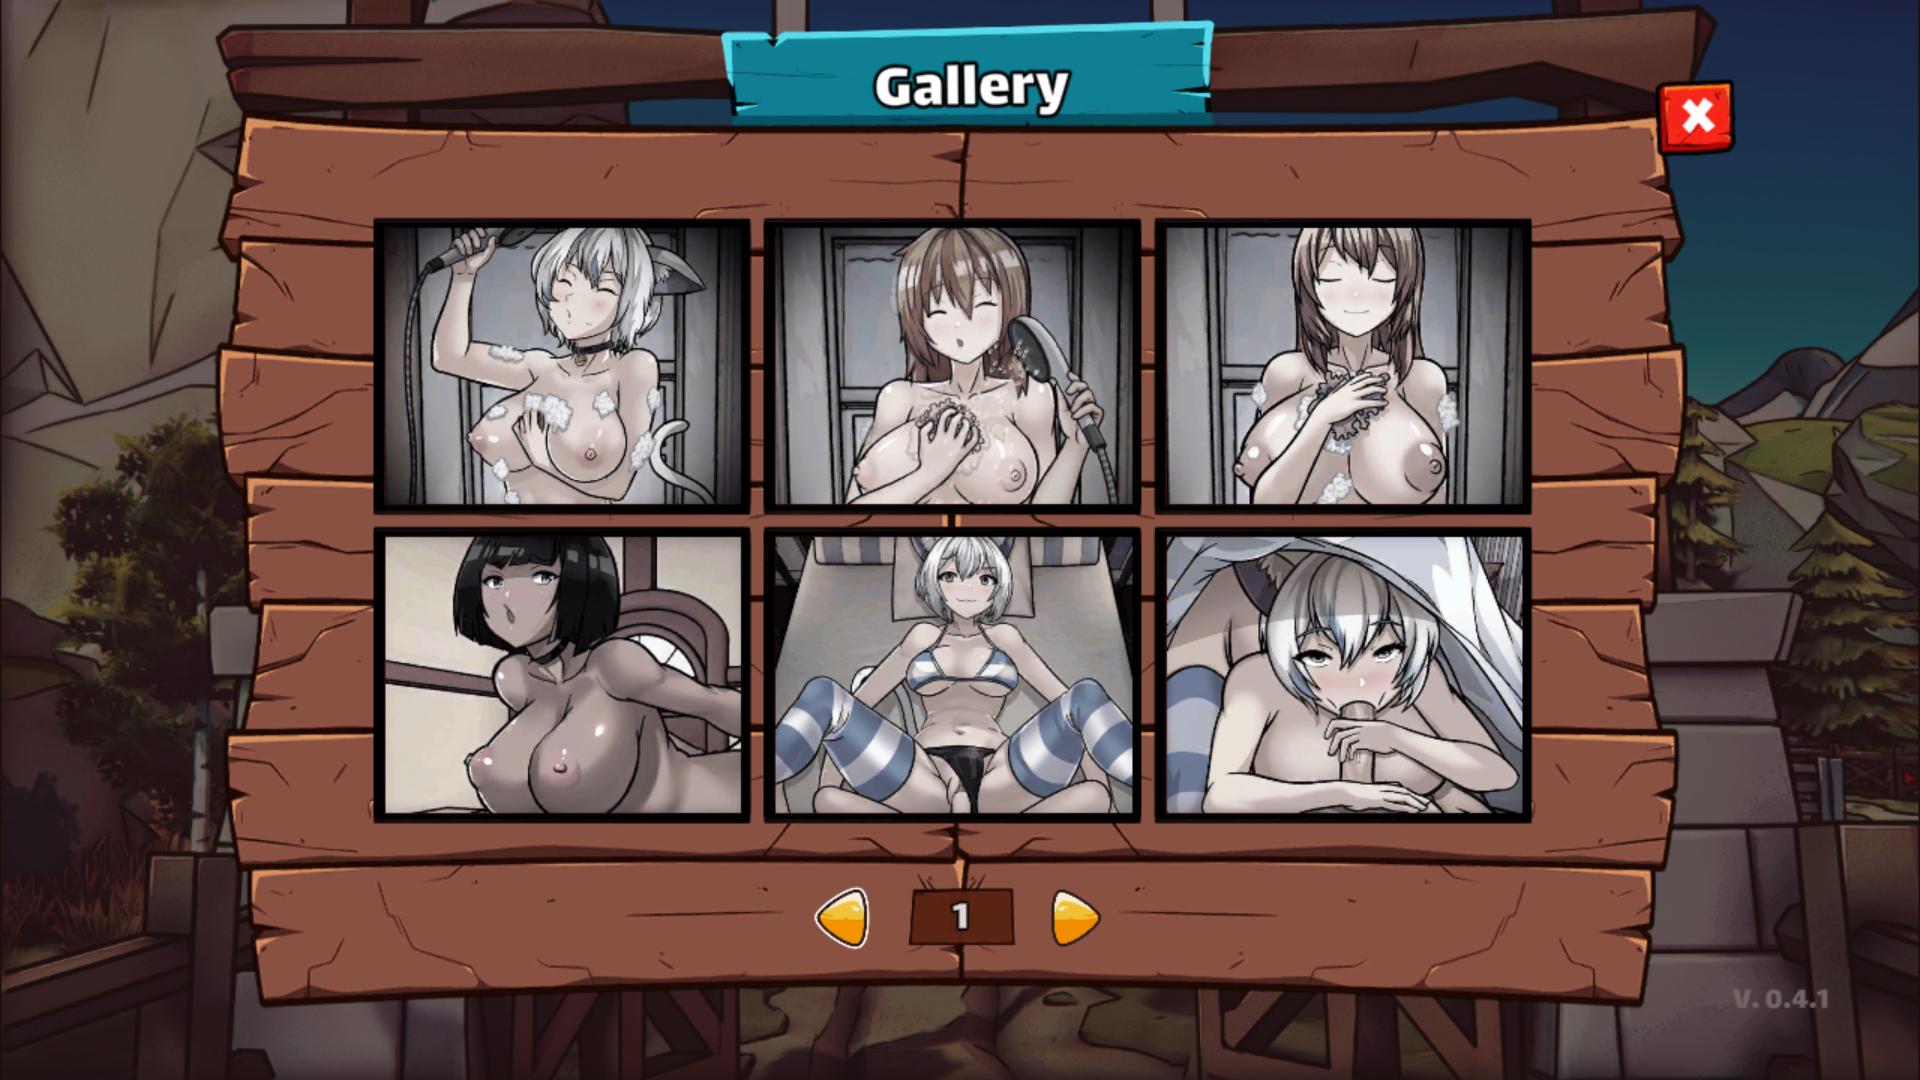 In the gallery I found send missing spots in pages 3 to 5 can someone tell ...